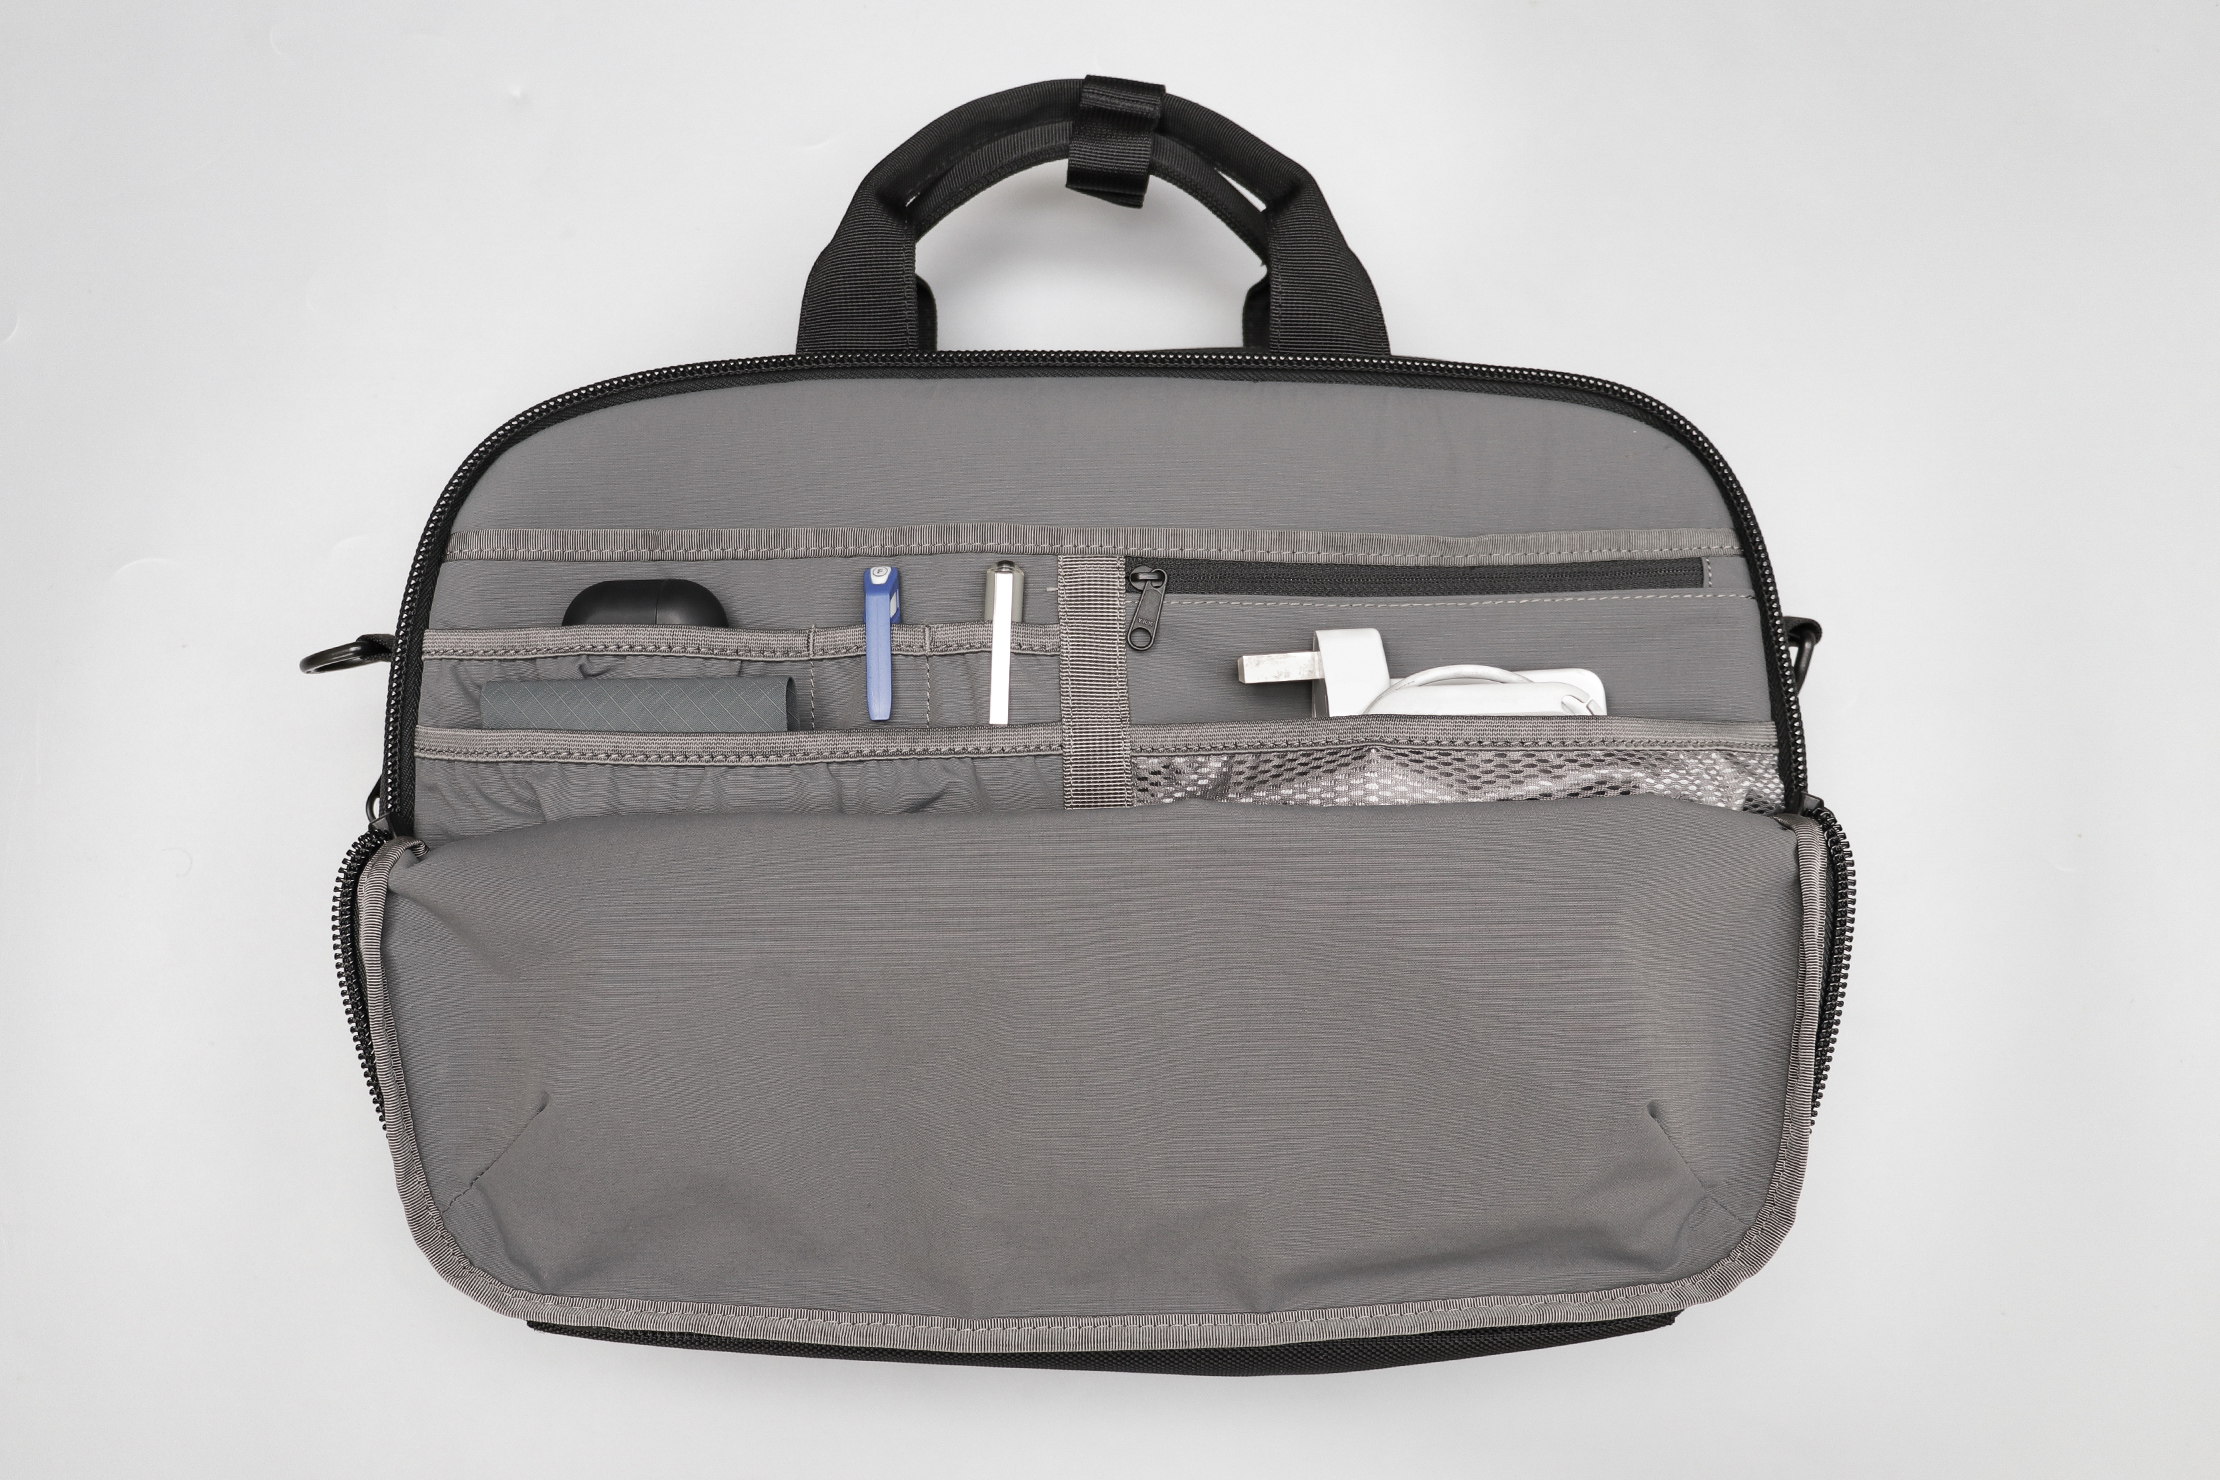 Aer Commuter Brief 2 Front Compartment Organization